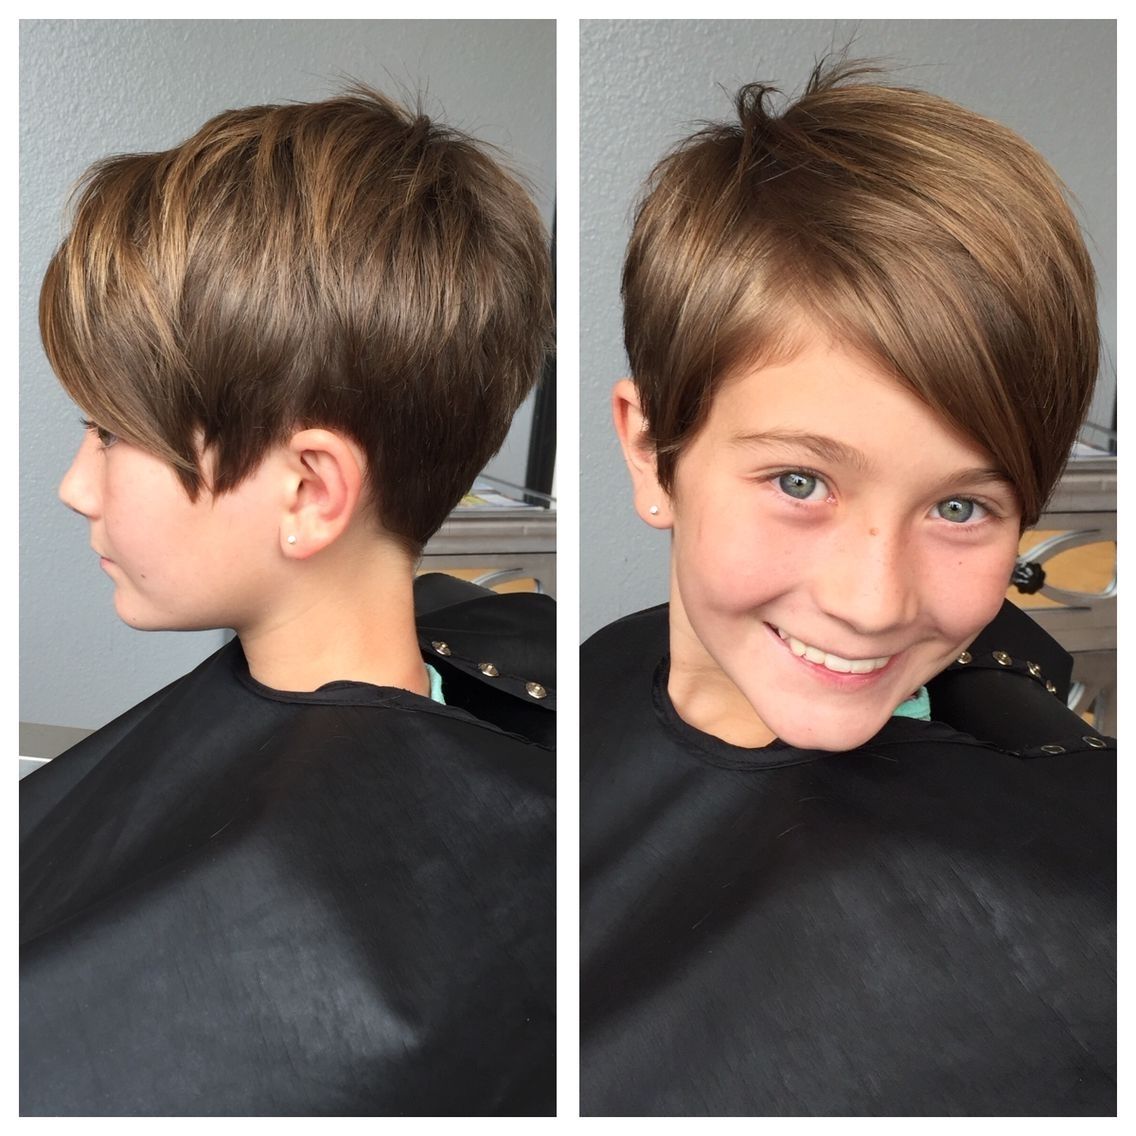 Kids Pixie Haircut | Hair | Pinterest | Pixie Haircut, Pixies And In Best And Newest Short Pixie Hairstyles For Little Girls (Photo 3 of 15)